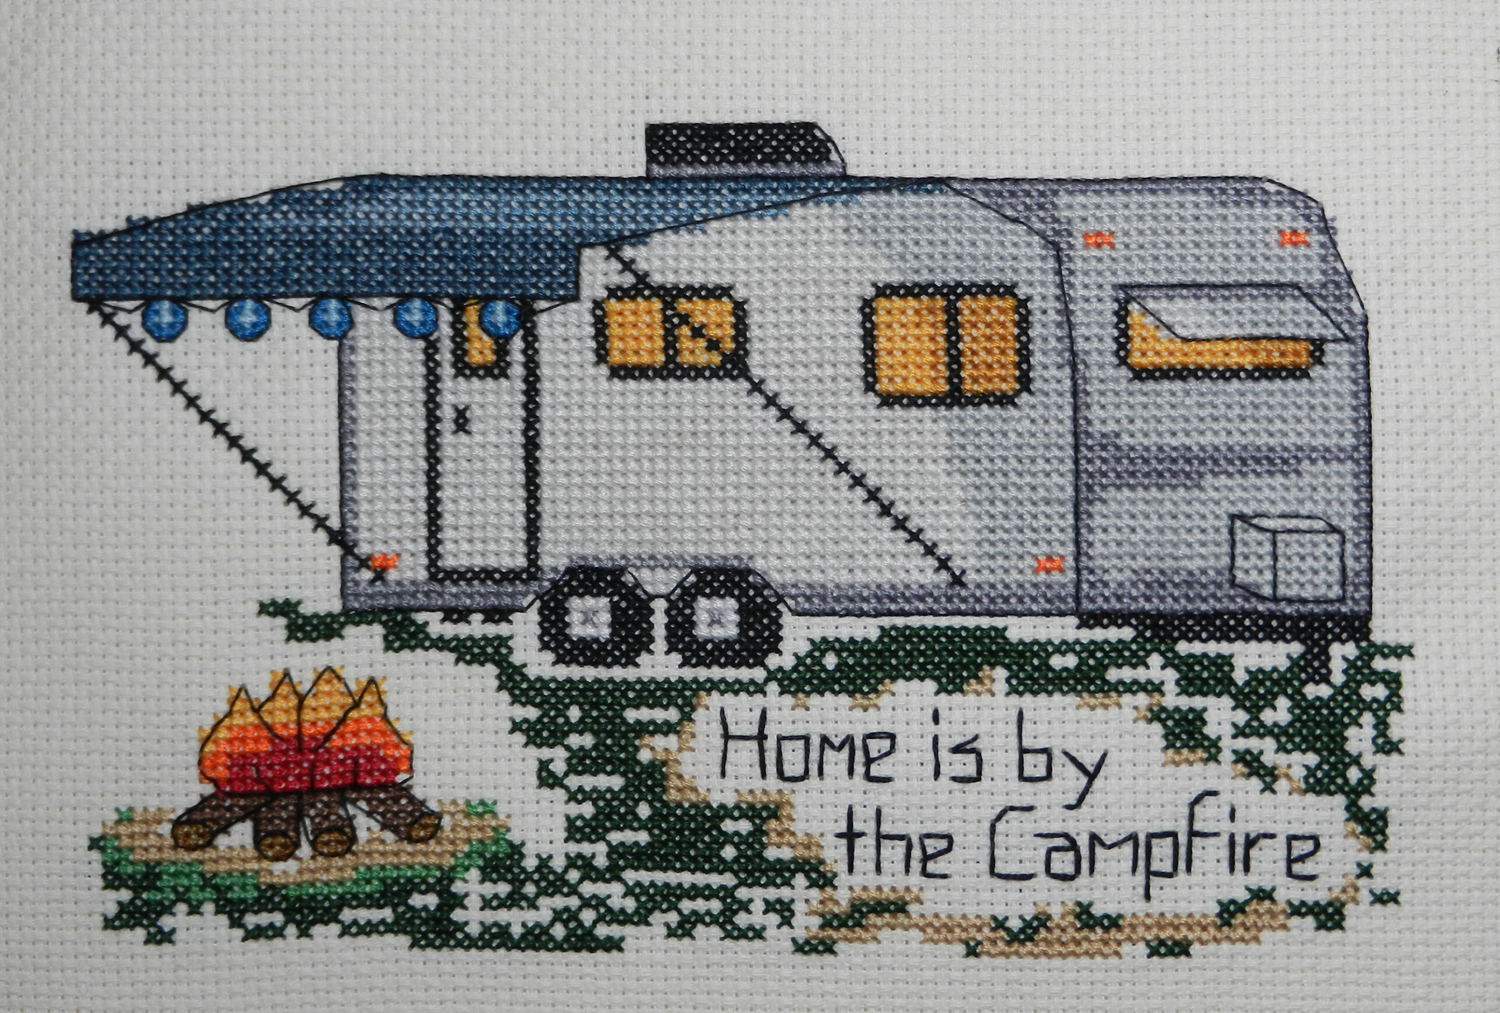 Trailer Home is by the Campfire Cross Stitch